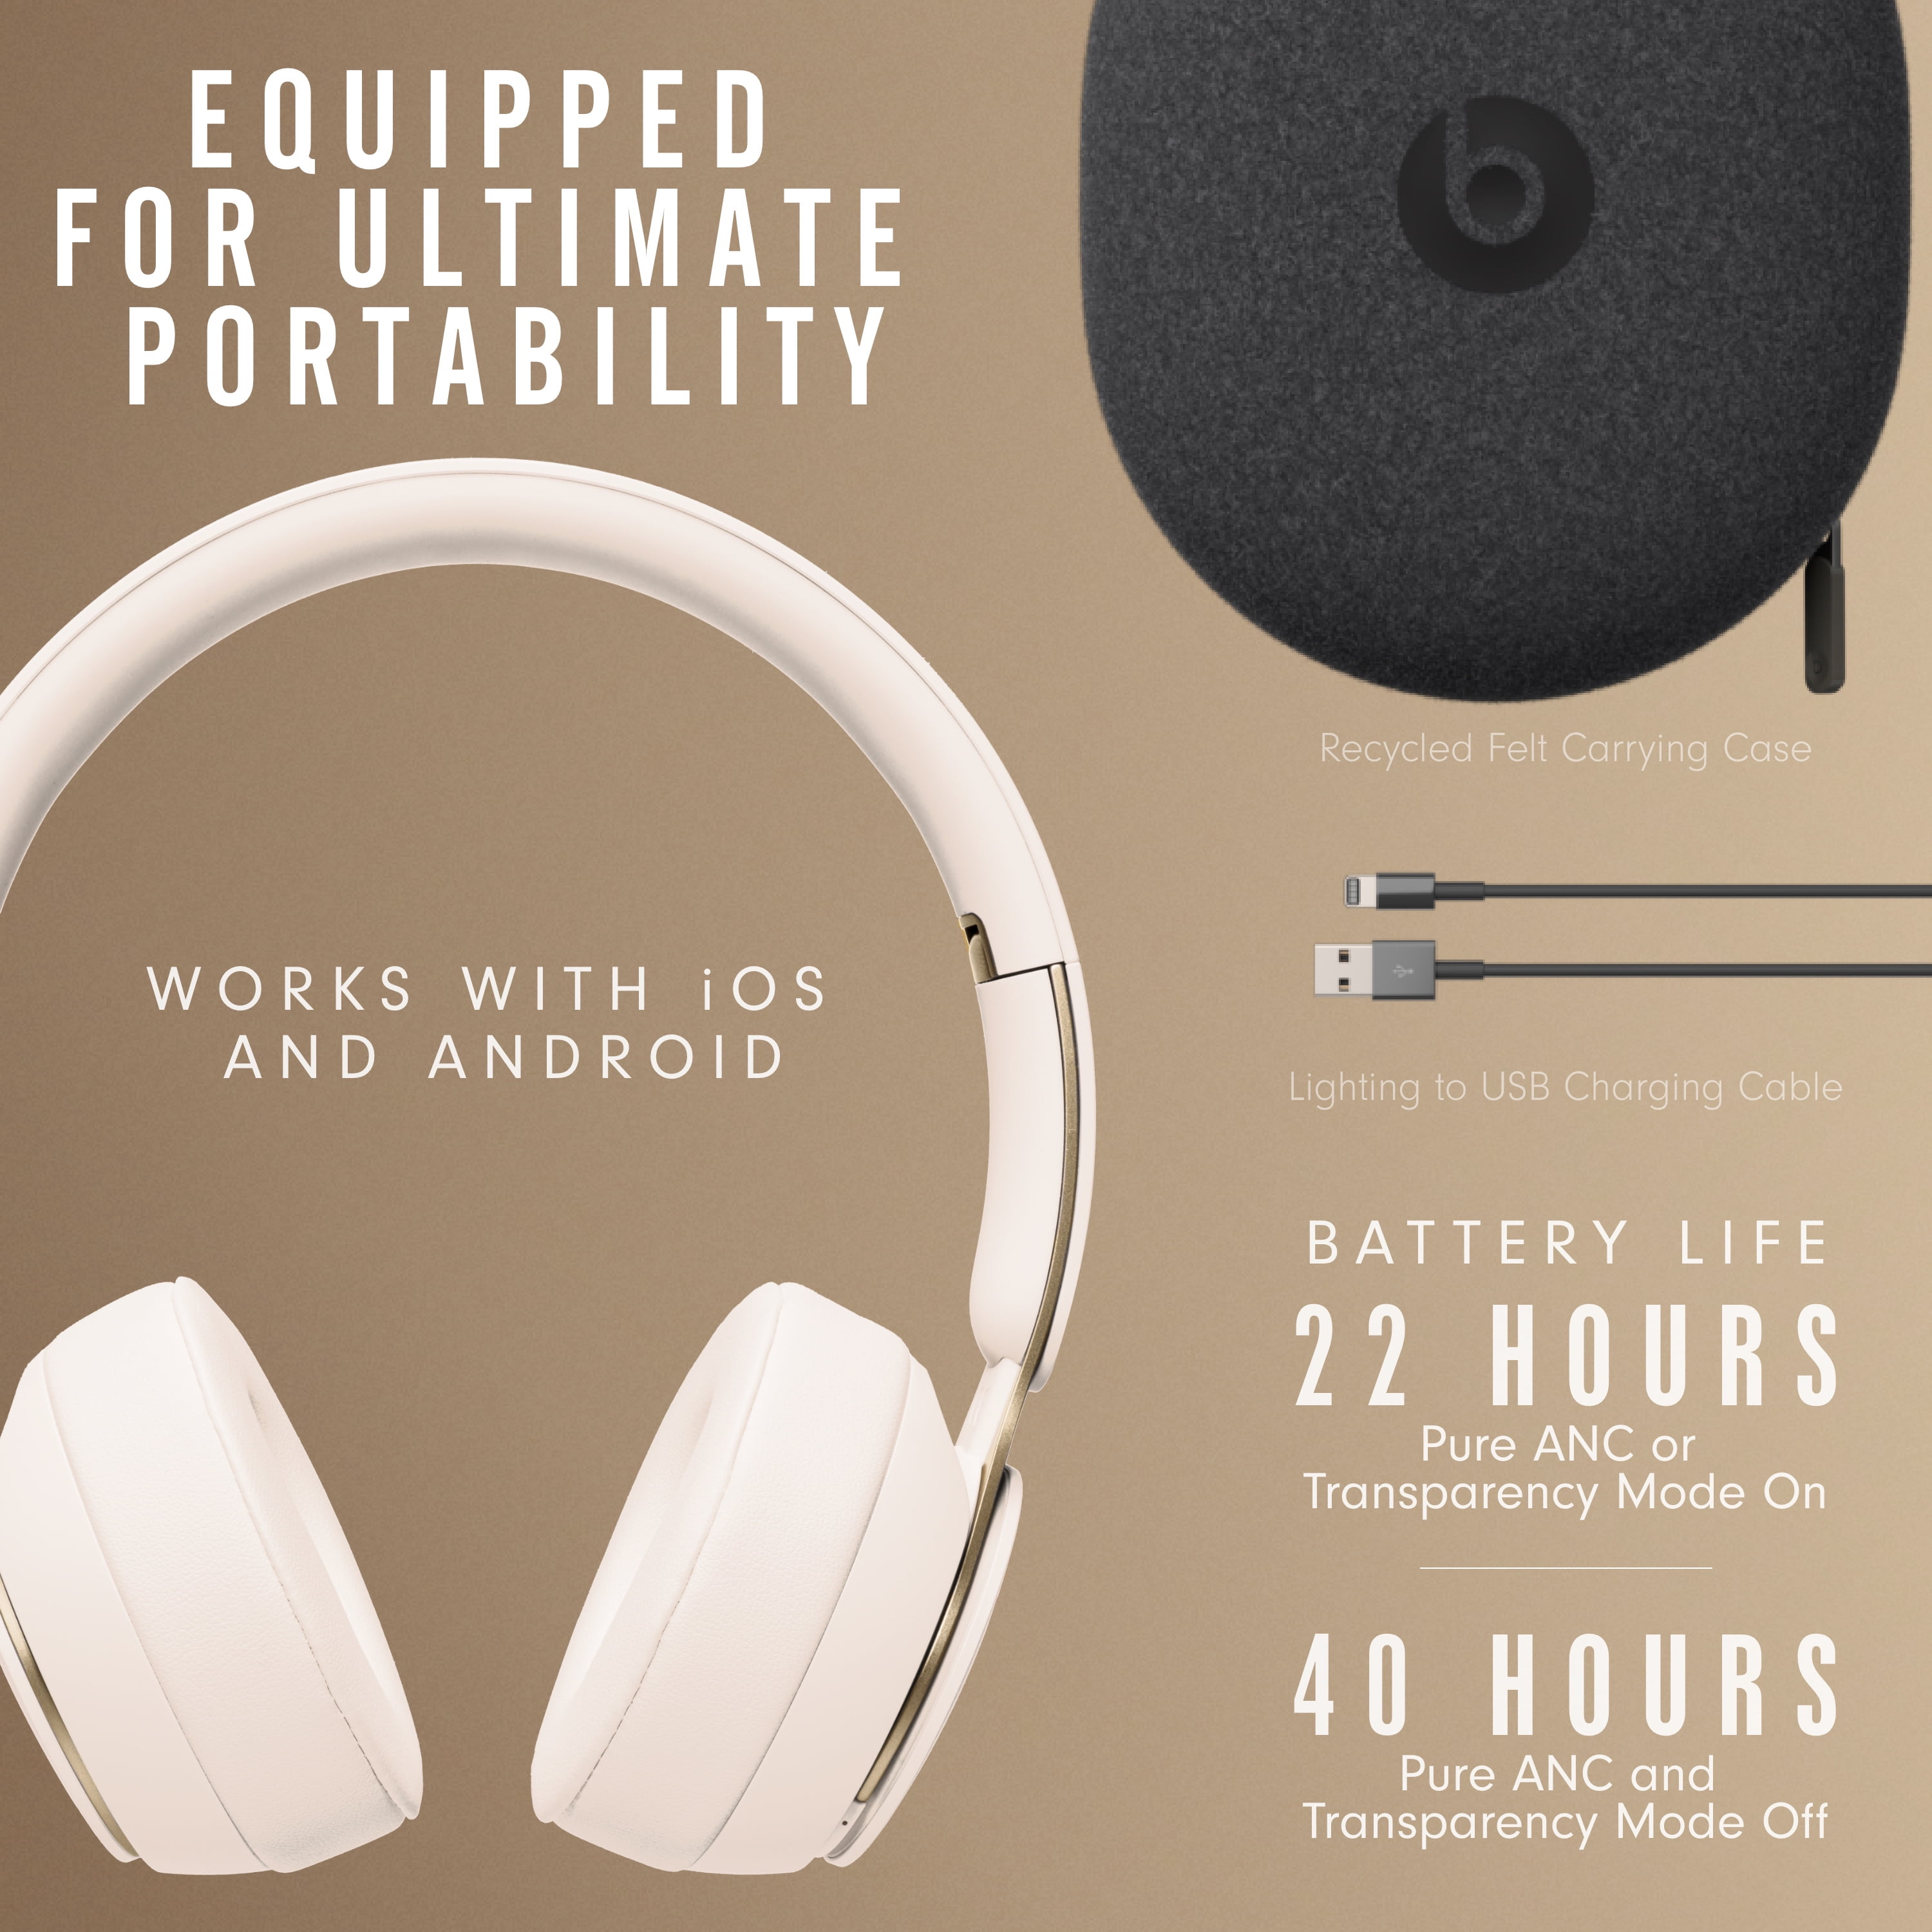 Beats Solo Pro Wireless Noise Cancelling On-Ear Headphones with 